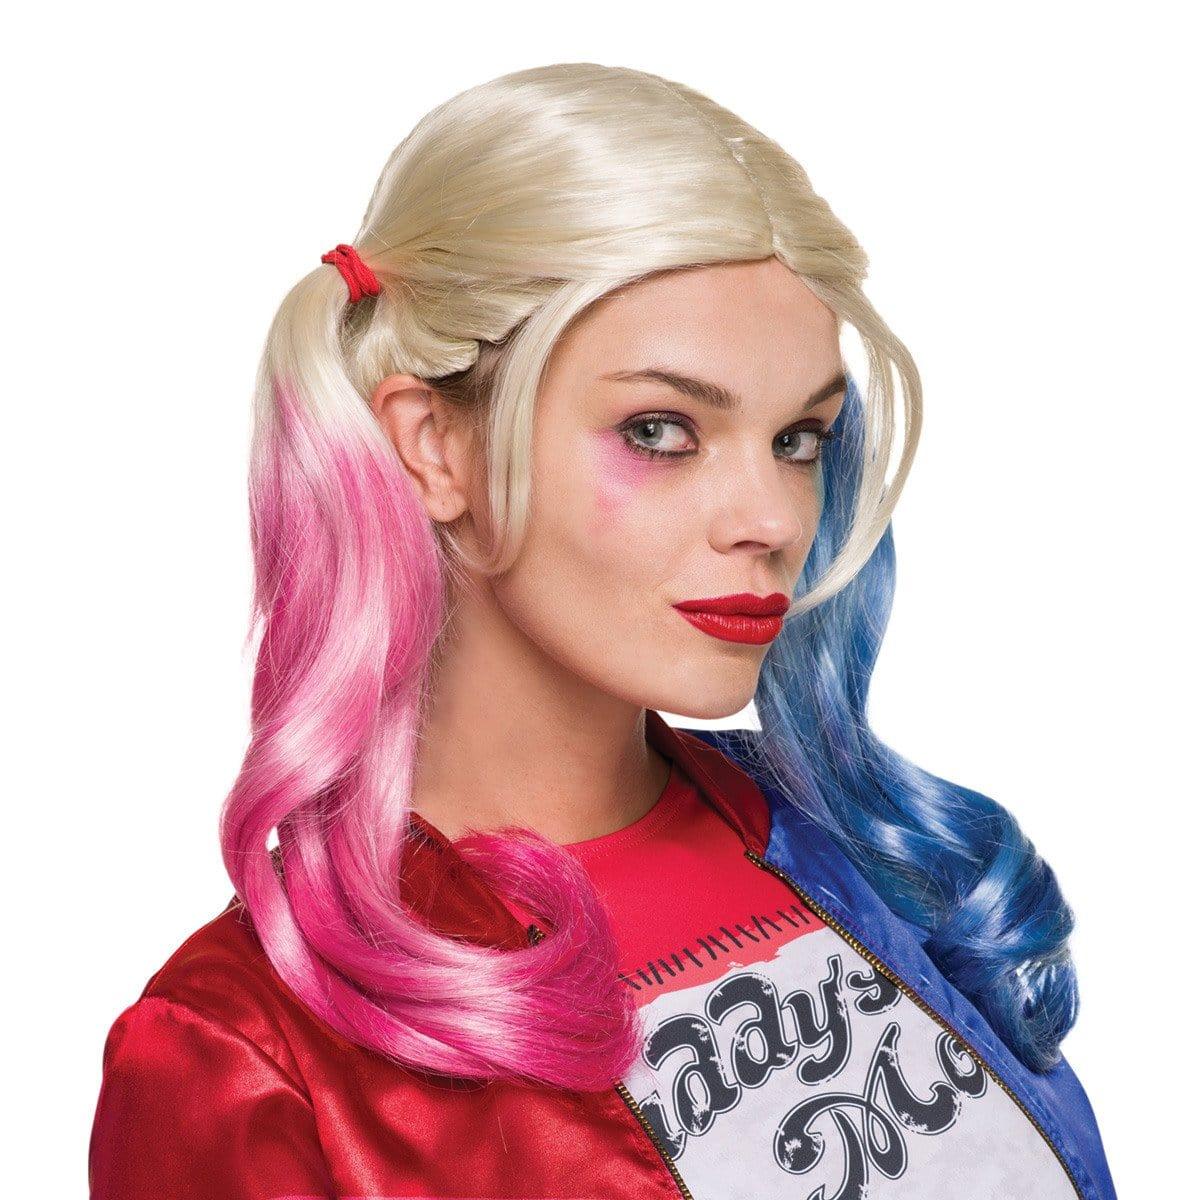 Buy Costume Accessories Harley Quinn wig for women, Suicide Squad sold at Party Expert